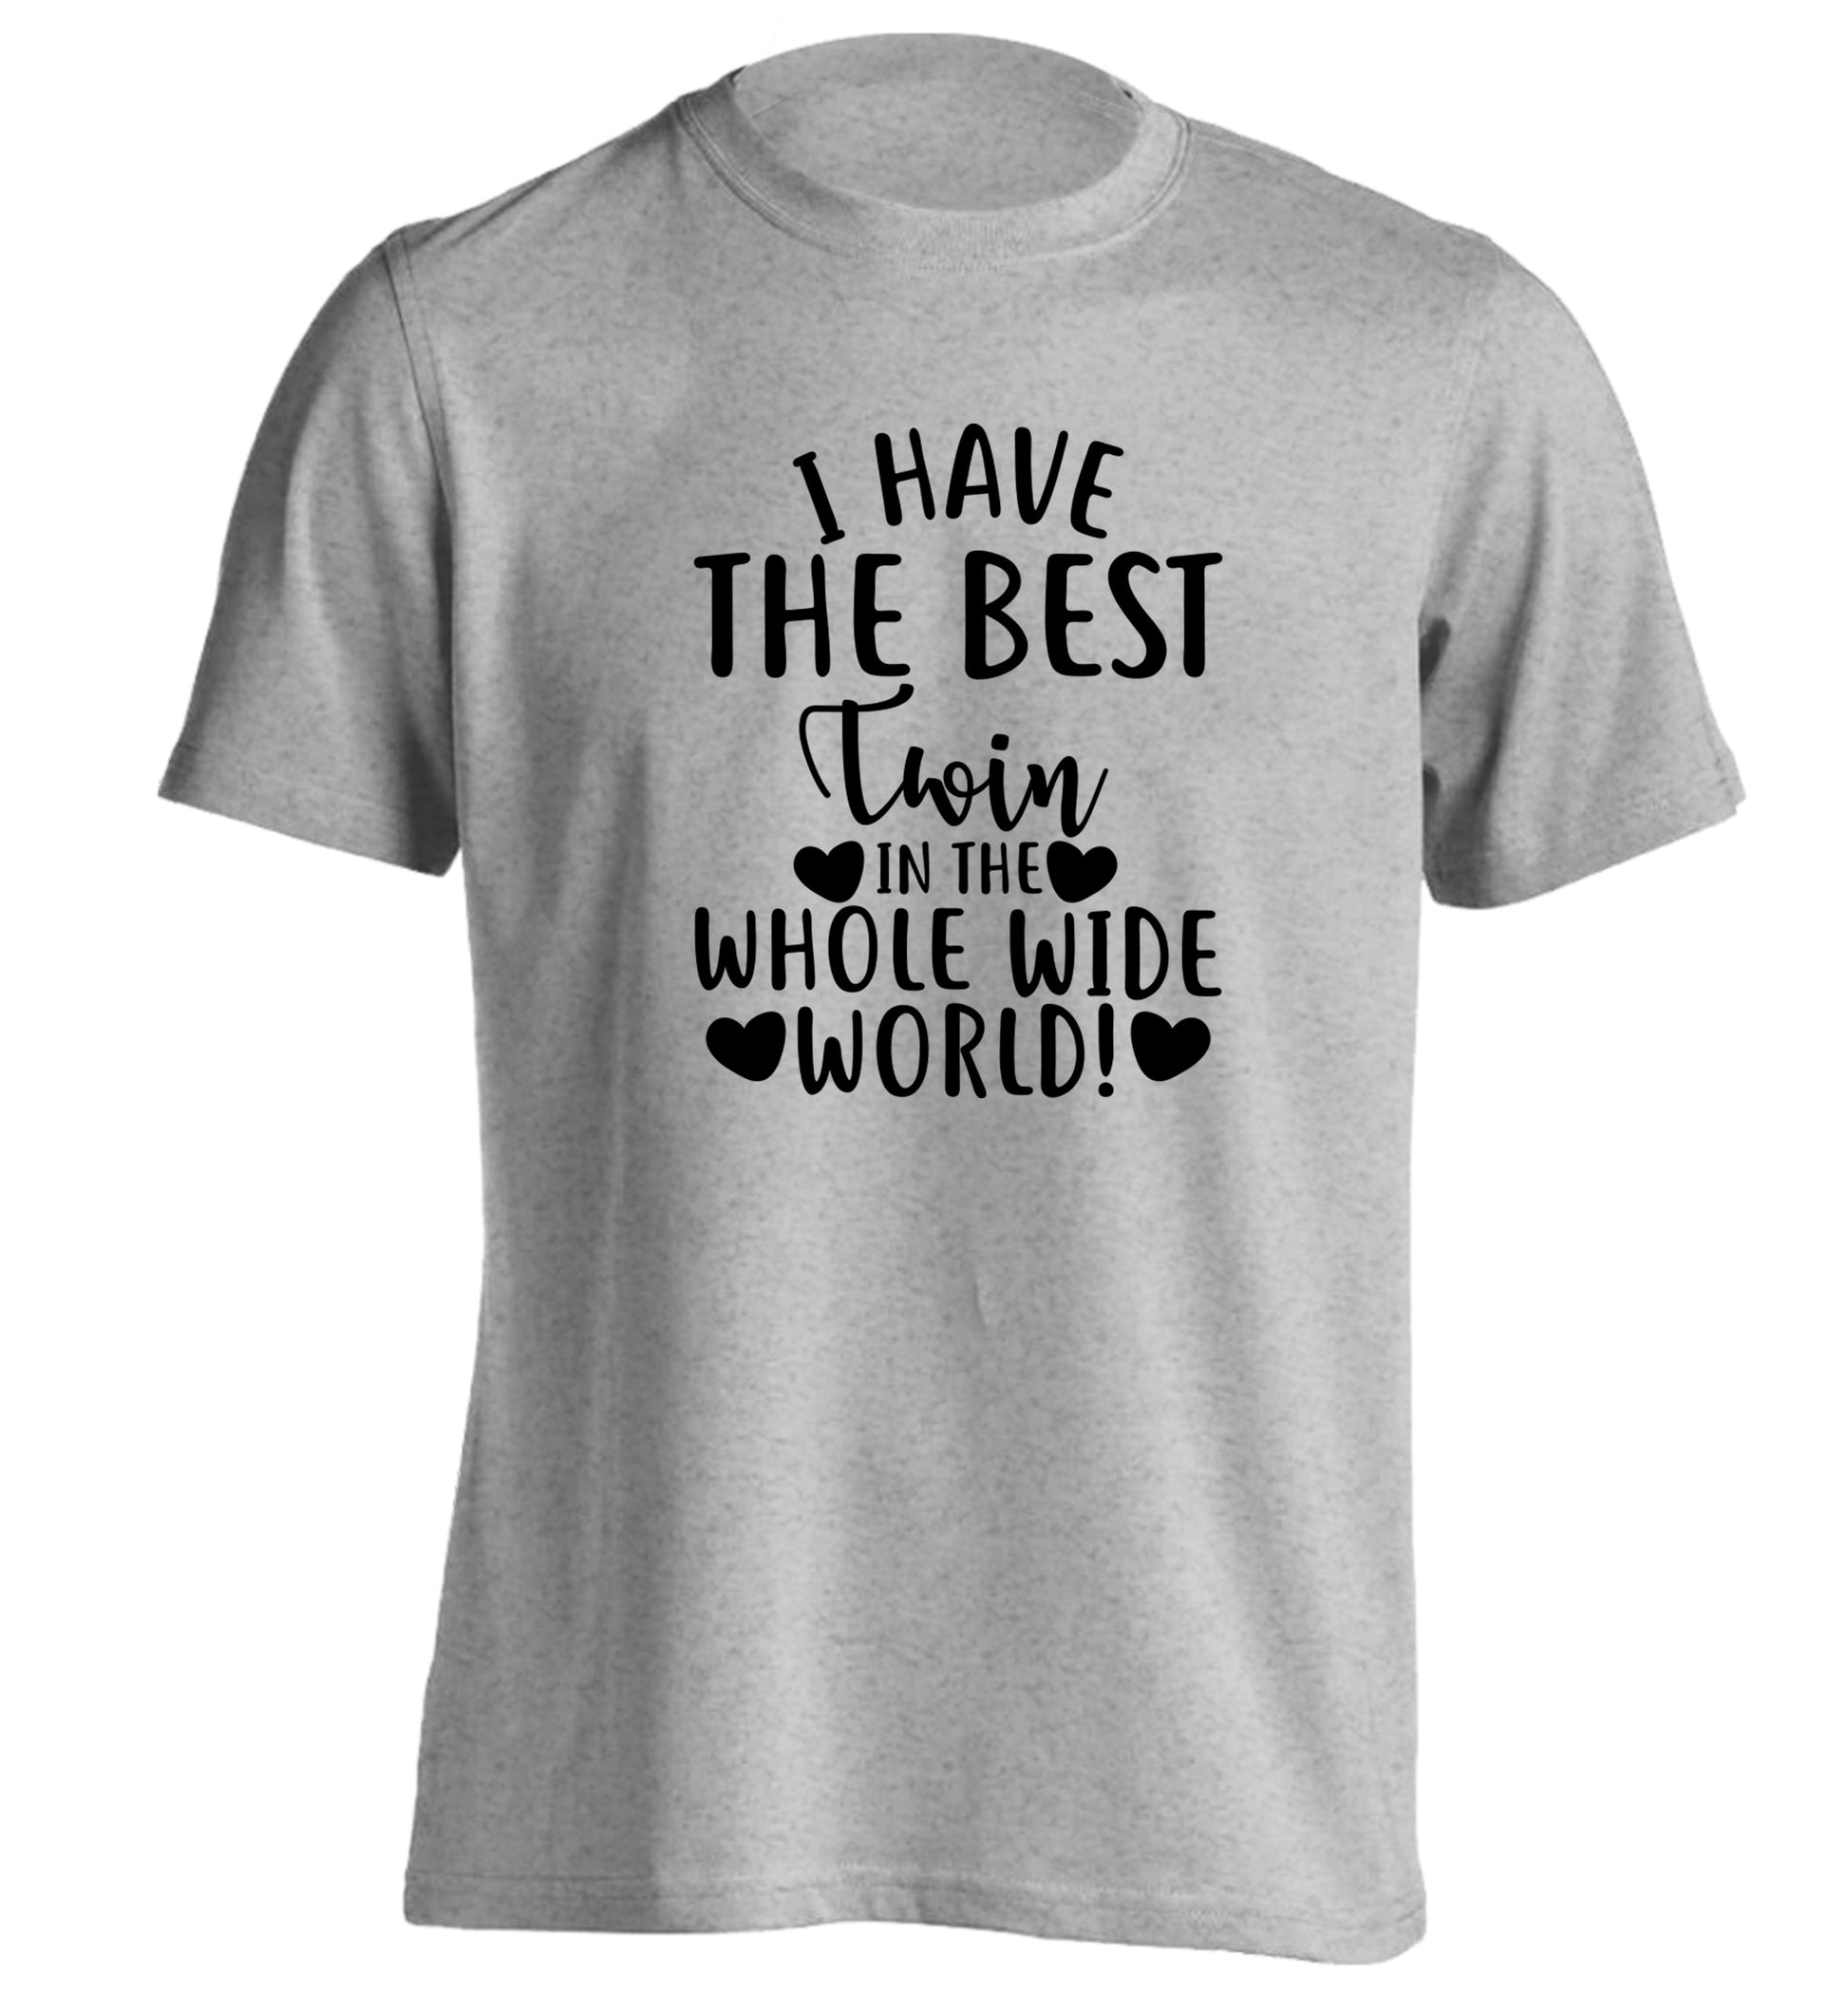 I have the best twin in the whole wide world! adults unisex grey Tshirt 2XL